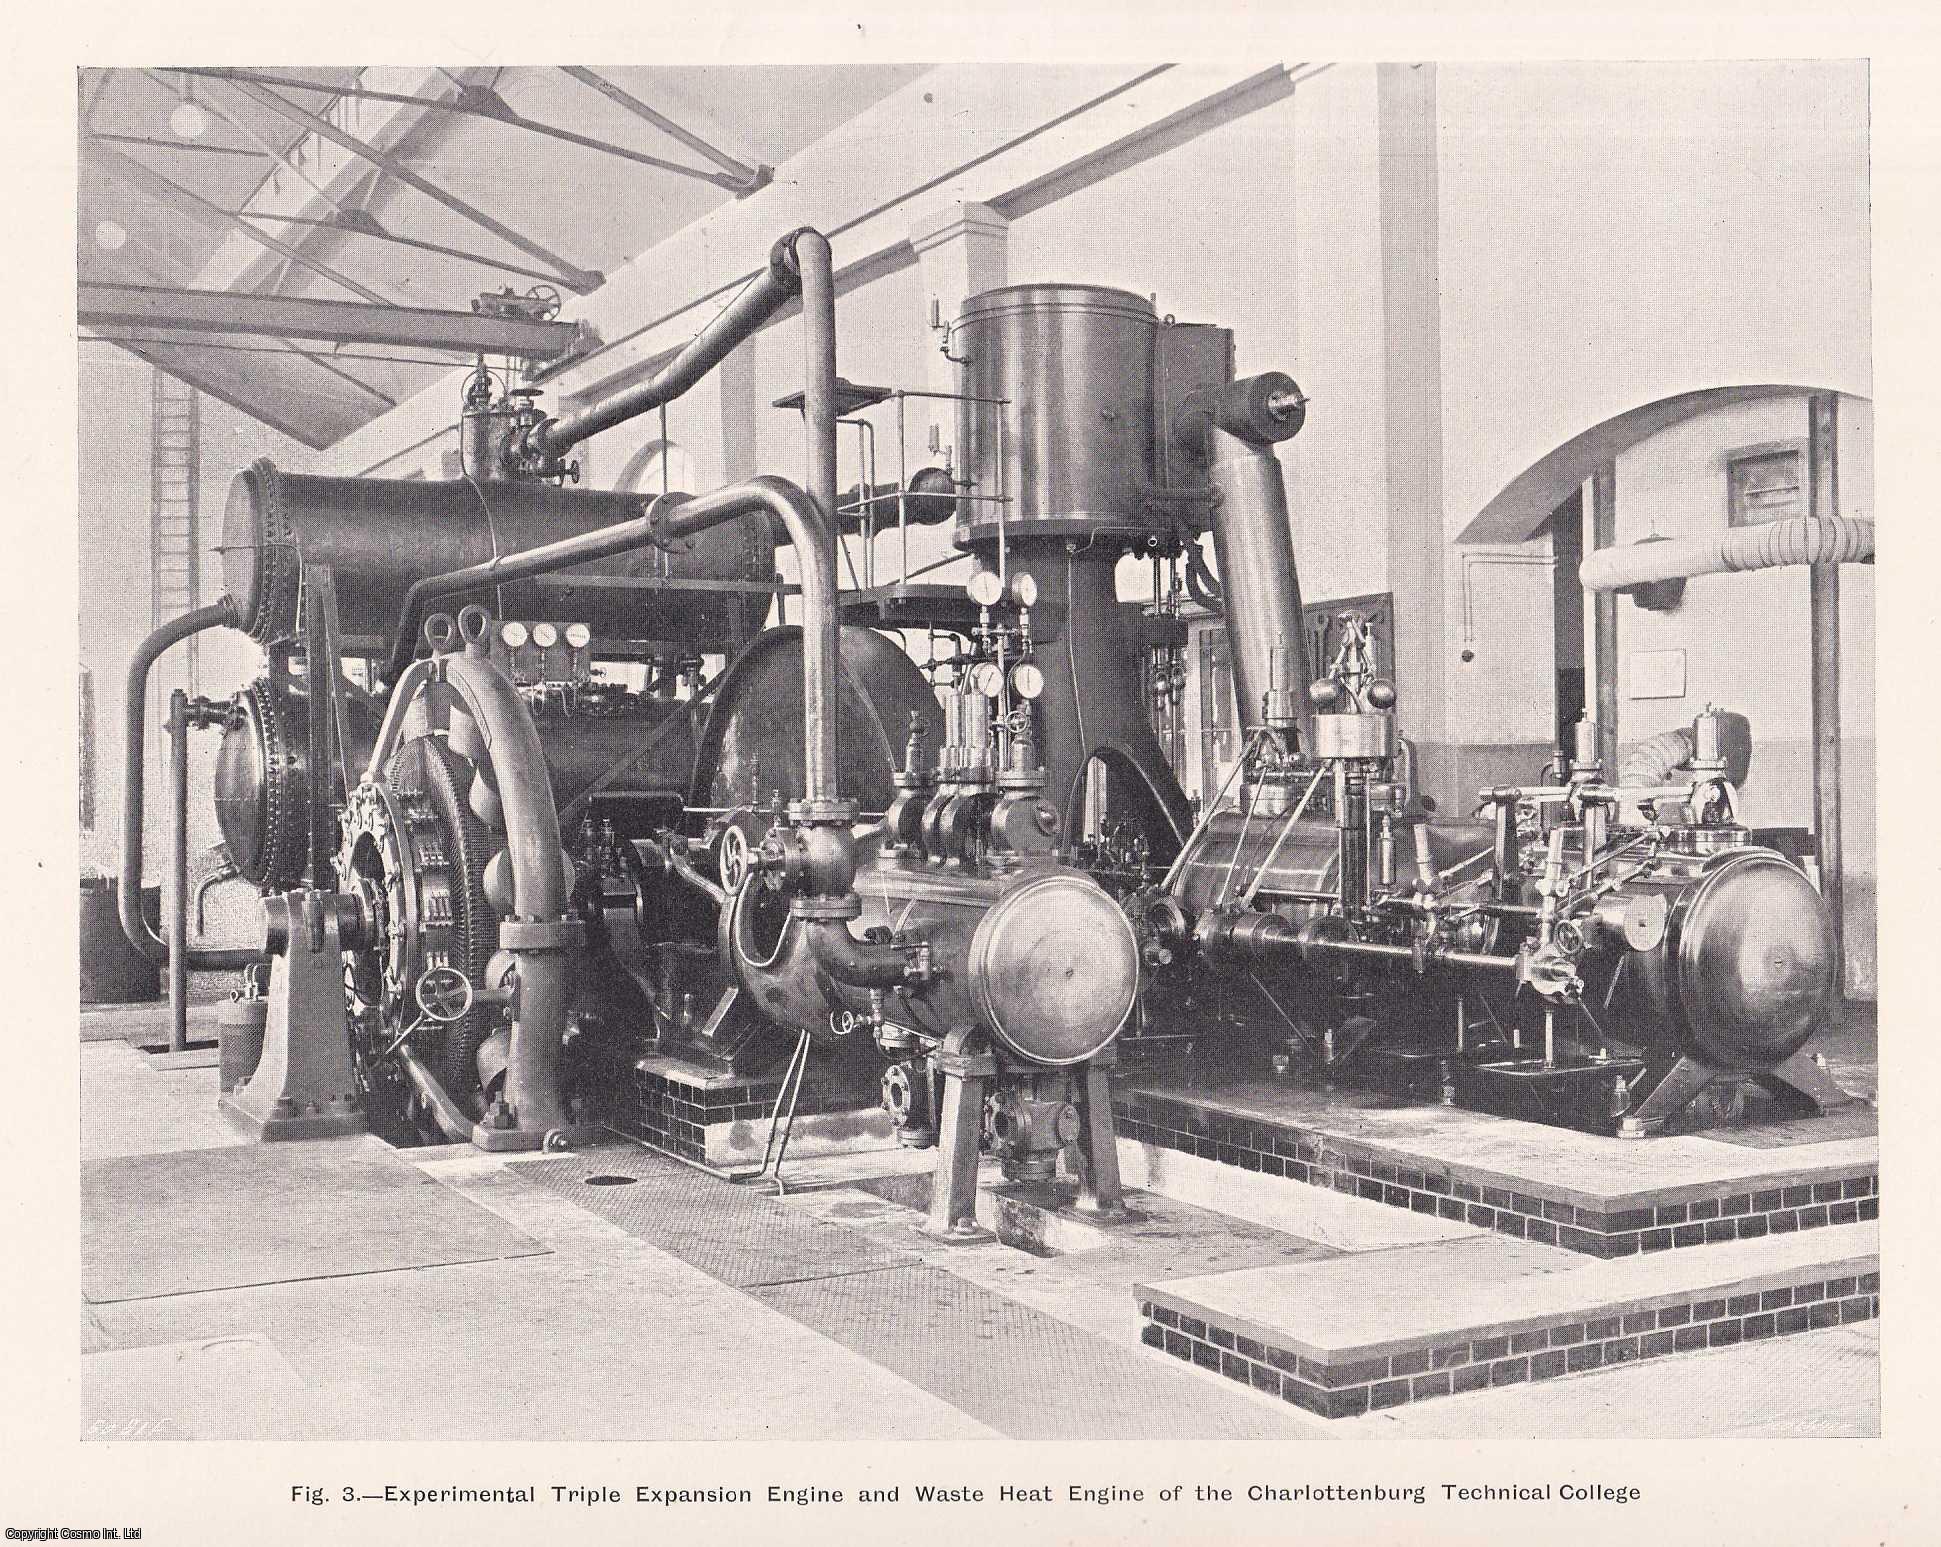 No Author Stated - The Waste Heat Engine. An original article from Engineering, 1901.